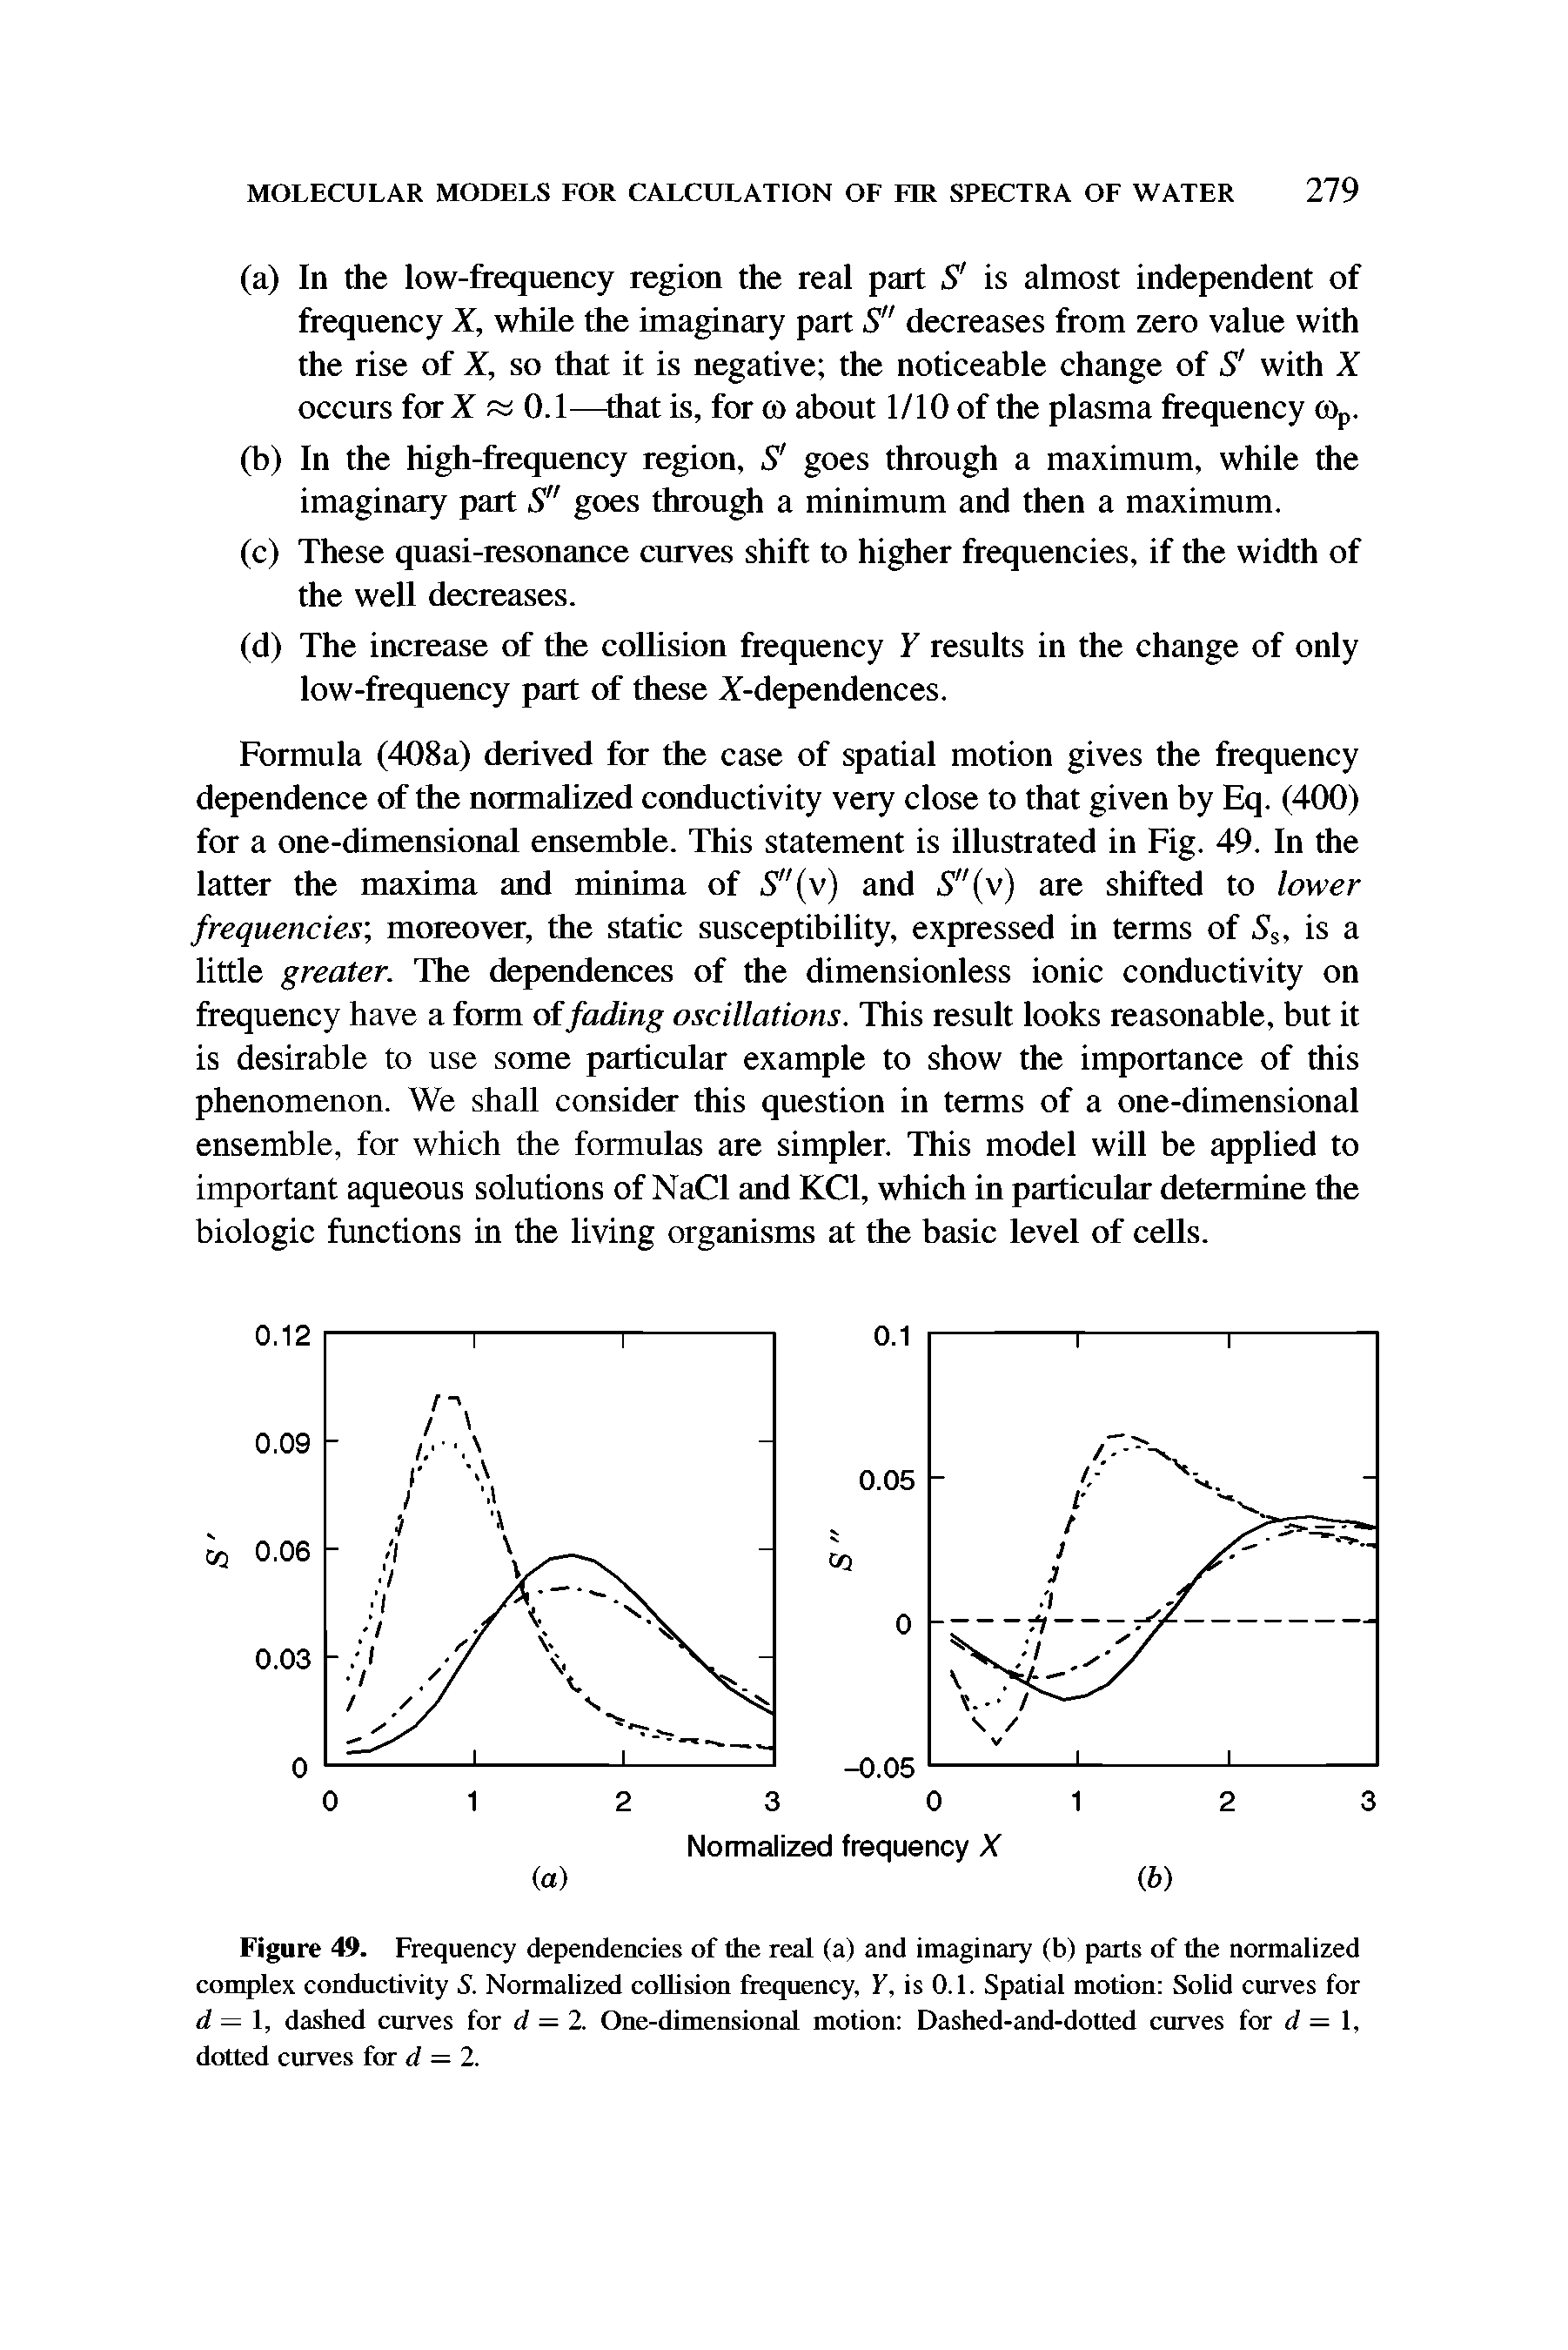 Figure 49. Frequency dependencies of the real (a) and imaginary (b) parts of the normalized complex conductivity S. Normalized collision frequency, Y, is 0.1. Spatial motion Solid curves for d=, dashed curves for d = 2. One-dimensional motion Dashed-and-dotted curves for d = 1, dotted curves for d = 2.